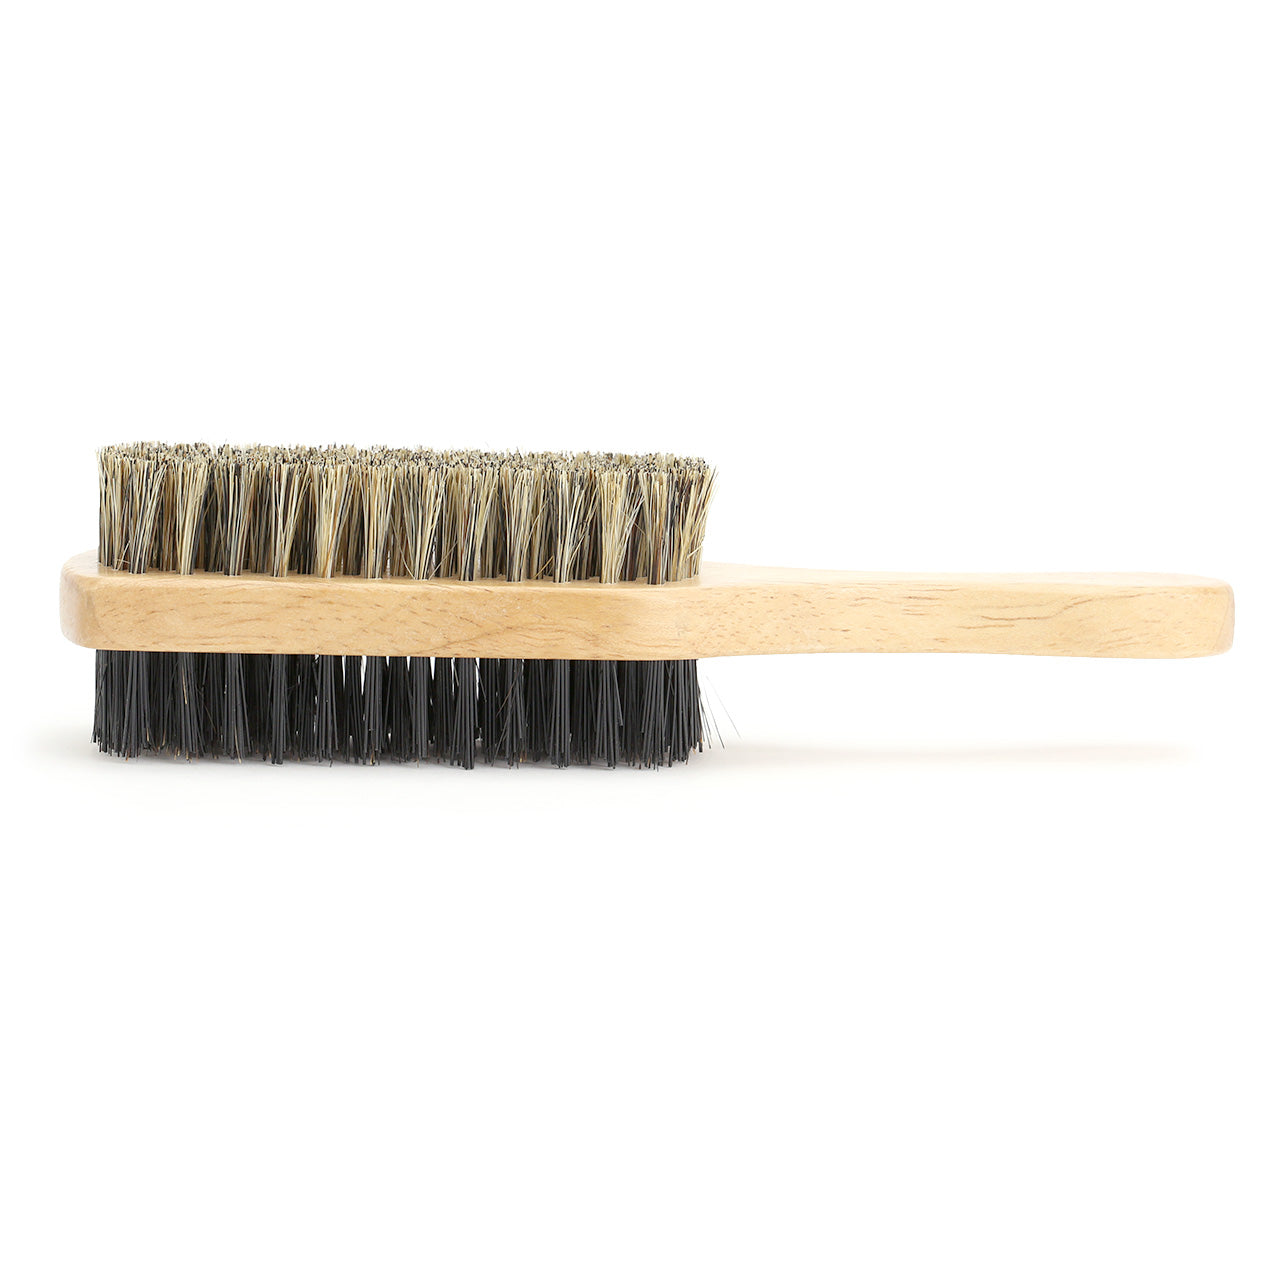 Beard Brush, two sided with wooden paddle handle - side view